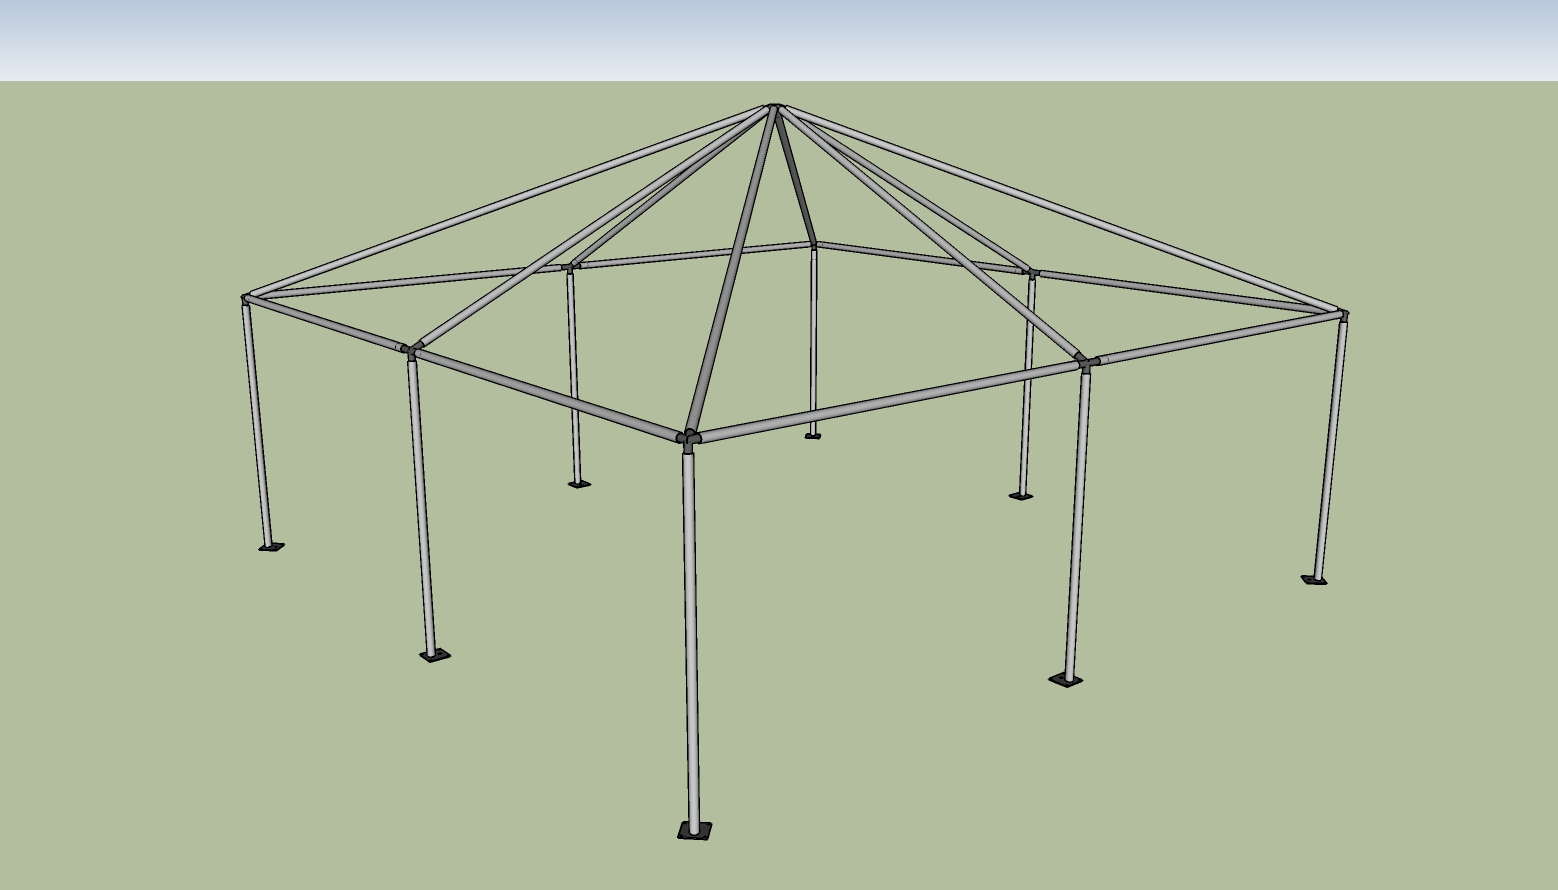 20x20 frame tent End View